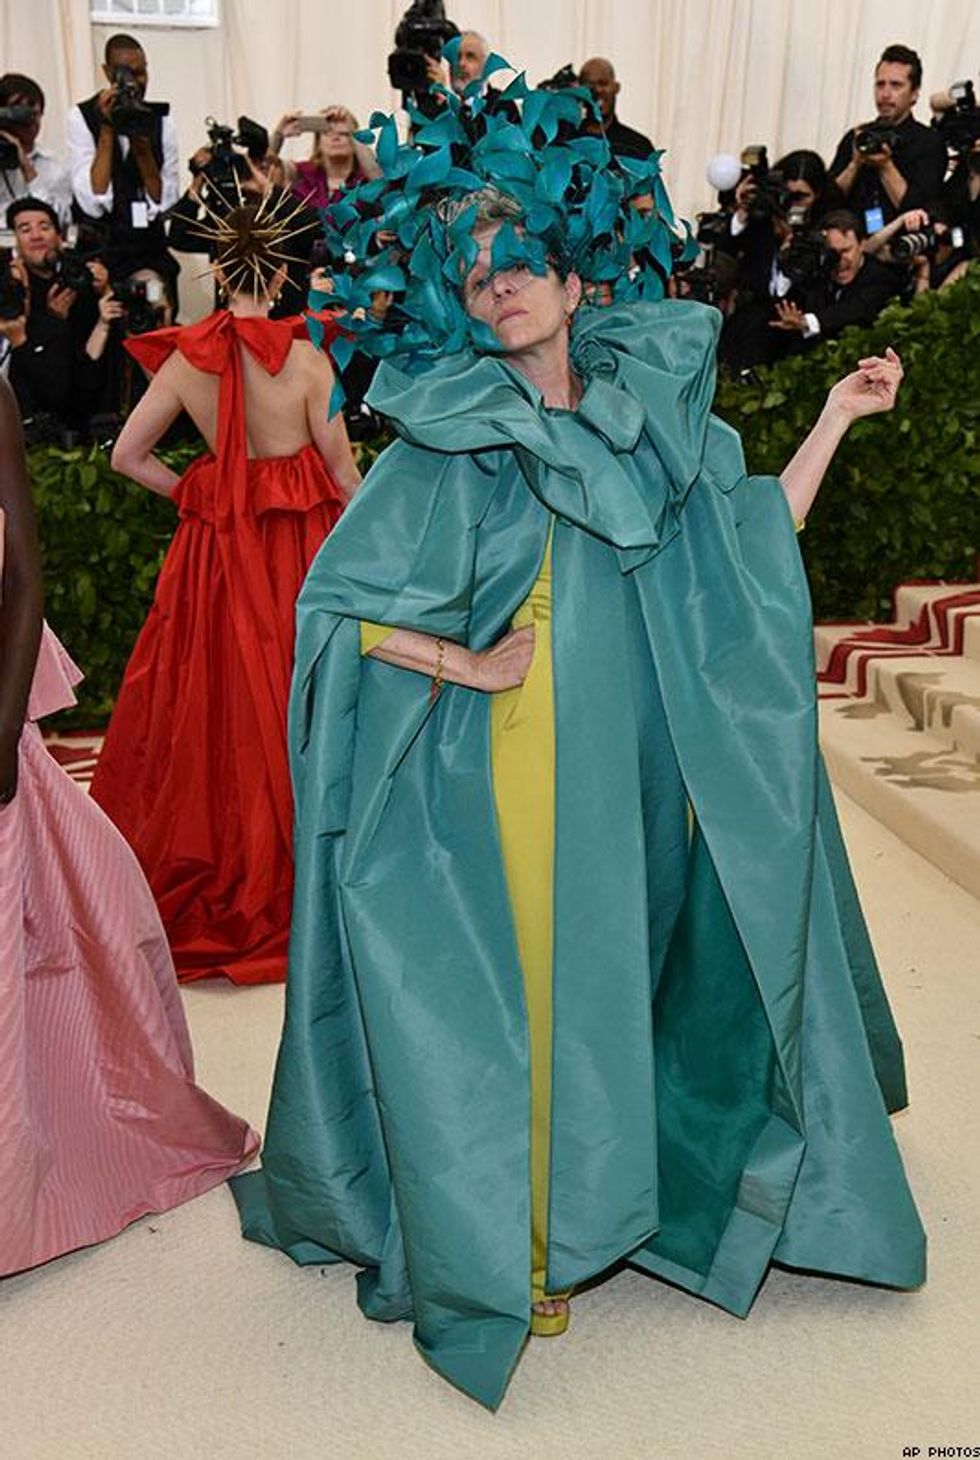 Met Gala 2018: The Only Red Carpet Looks That Matter